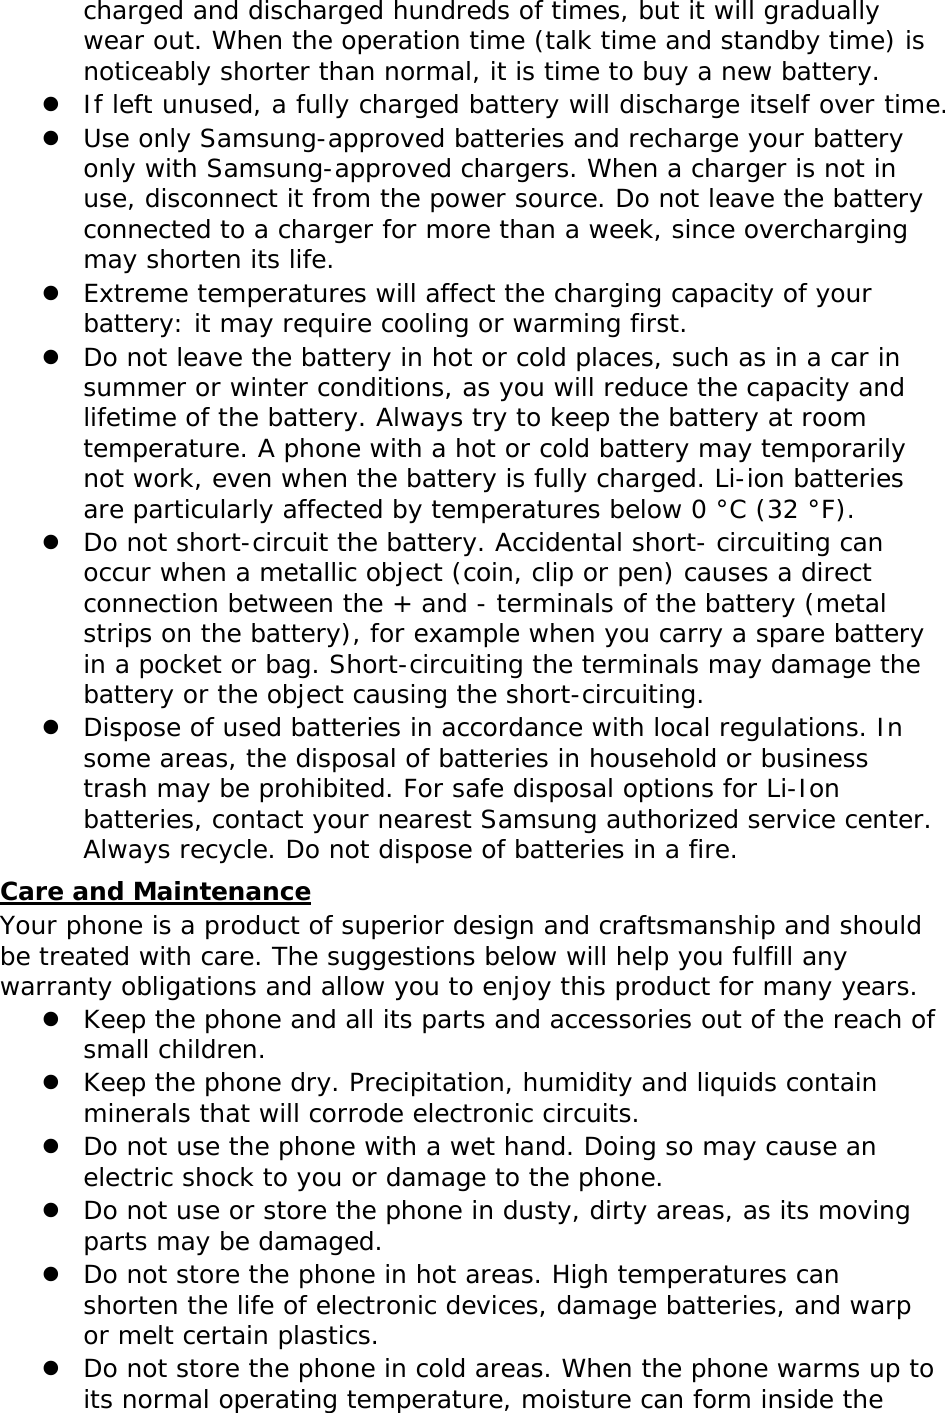 charged and discharged hundreds of times, but it will gradually wear out. When the operation time (talk time and standby time) is noticeably shorter than normal, it is time to buy a new battery. z If left unused, a fully charged battery will discharge itself over time. z Use only Samsung-approved batteries and recharge your battery only with Samsung-approved chargers. When a charger is not in use, disconnect it from the power source. Do not leave the battery connected to a charger for more than a week, since overcharging may shorten its life. z Extreme temperatures will affect the charging capacity of your battery: it may require cooling or warming first. z Do not leave the battery in hot or cold places, such as in a car in summer or winter conditions, as you will reduce the capacity and lifetime of the battery. Always try to keep the battery at room temperature. A phone with a hot or cold battery may temporarily not work, even when the battery is fully charged. Li-ion batteries are particularly affected by temperatures below 0 °C (32 °F). z Do not short-circuit the battery. Accidental short- circuiting can occur when a metallic object (coin, clip or pen) causes a direct connection between the + and - terminals of the battery (metal strips on the battery), for example when you carry a spare battery in a pocket or bag. Short-circuiting the terminals may damage the battery or the object causing the short-circuiting. z Dispose of used batteries in accordance with local regulations. In some areas, the disposal of batteries in household or business trash may be prohibited. For safe disposal options for Li-Ion batteries, contact your nearest Samsung authorized service center. Always recycle. Do not dispose of batteries in a fire. Care and Maintenance Your phone is a product of superior design and craftsmanship and should be treated with care. The suggestions below will help you fulfill any warranty obligations and allow you to enjoy this product for many years. z Keep the phone and all its parts and accessories out of the reach of small children. z Keep the phone dry. Precipitation, humidity and liquids contain minerals that will corrode electronic circuits. z Do not use the phone with a wet hand. Doing so may cause an electric shock to you or damage to the phone. z Do not use or store the phone in dusty, dirty areas, as its moving parts may be damaged. z Do not store the phone in hot areas. High temperatures can shorten the life of electronic devices, damage batteries, and warp or melt certain plastics. z Do not store the phone in cold areas. When the phone warms up to its normal operating temperature, moisture can form inside the 